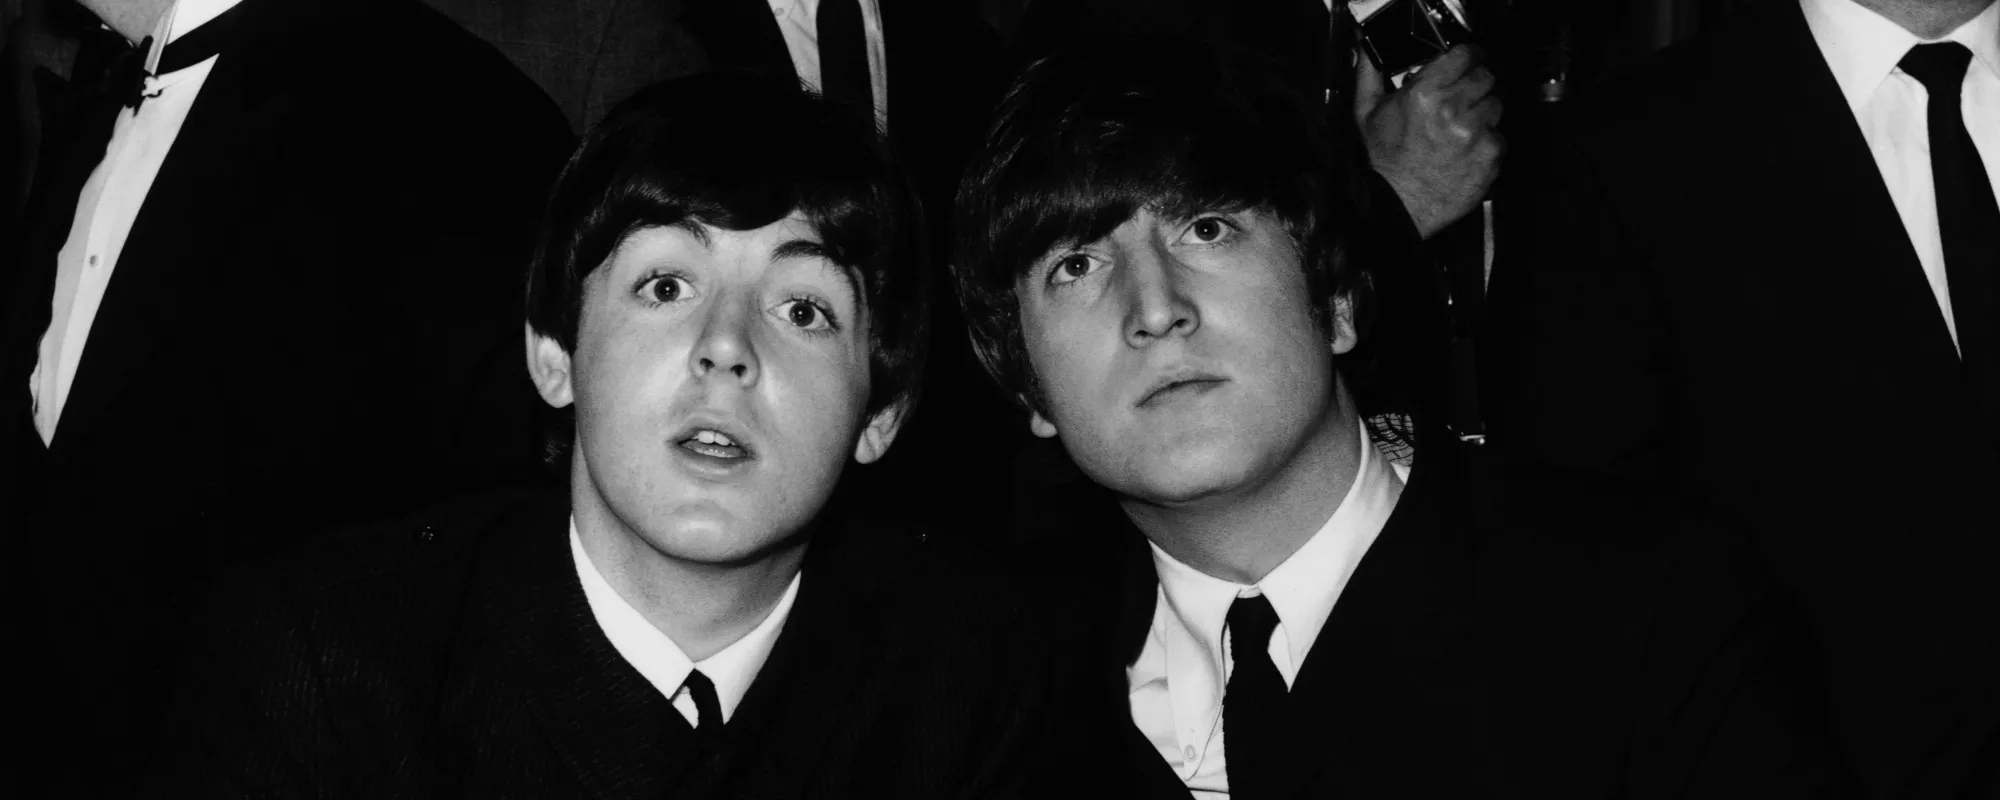 BBC Digs Up Recording of Earliest Beatles Show in England